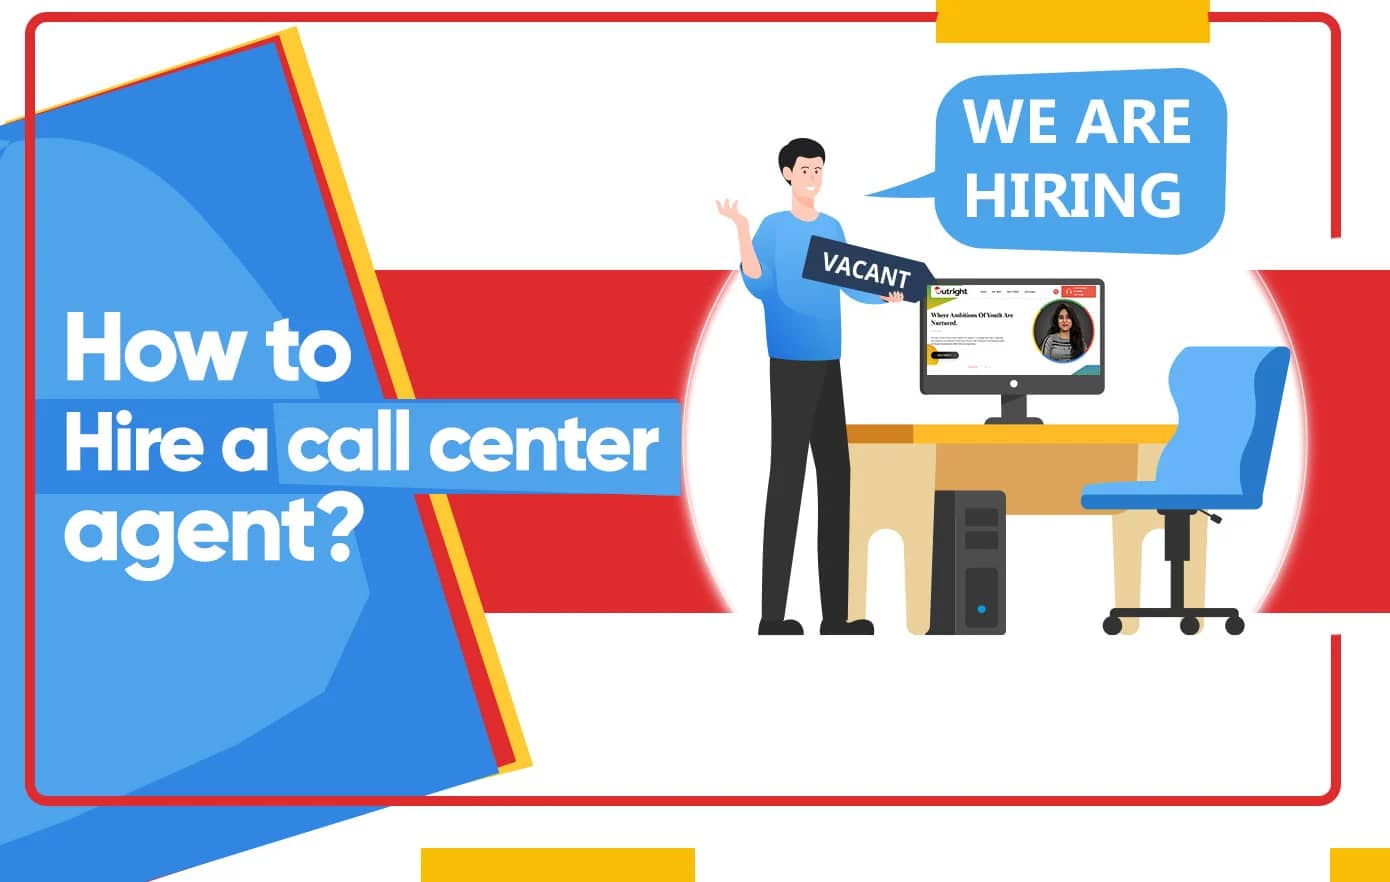 How to hire a call center agent